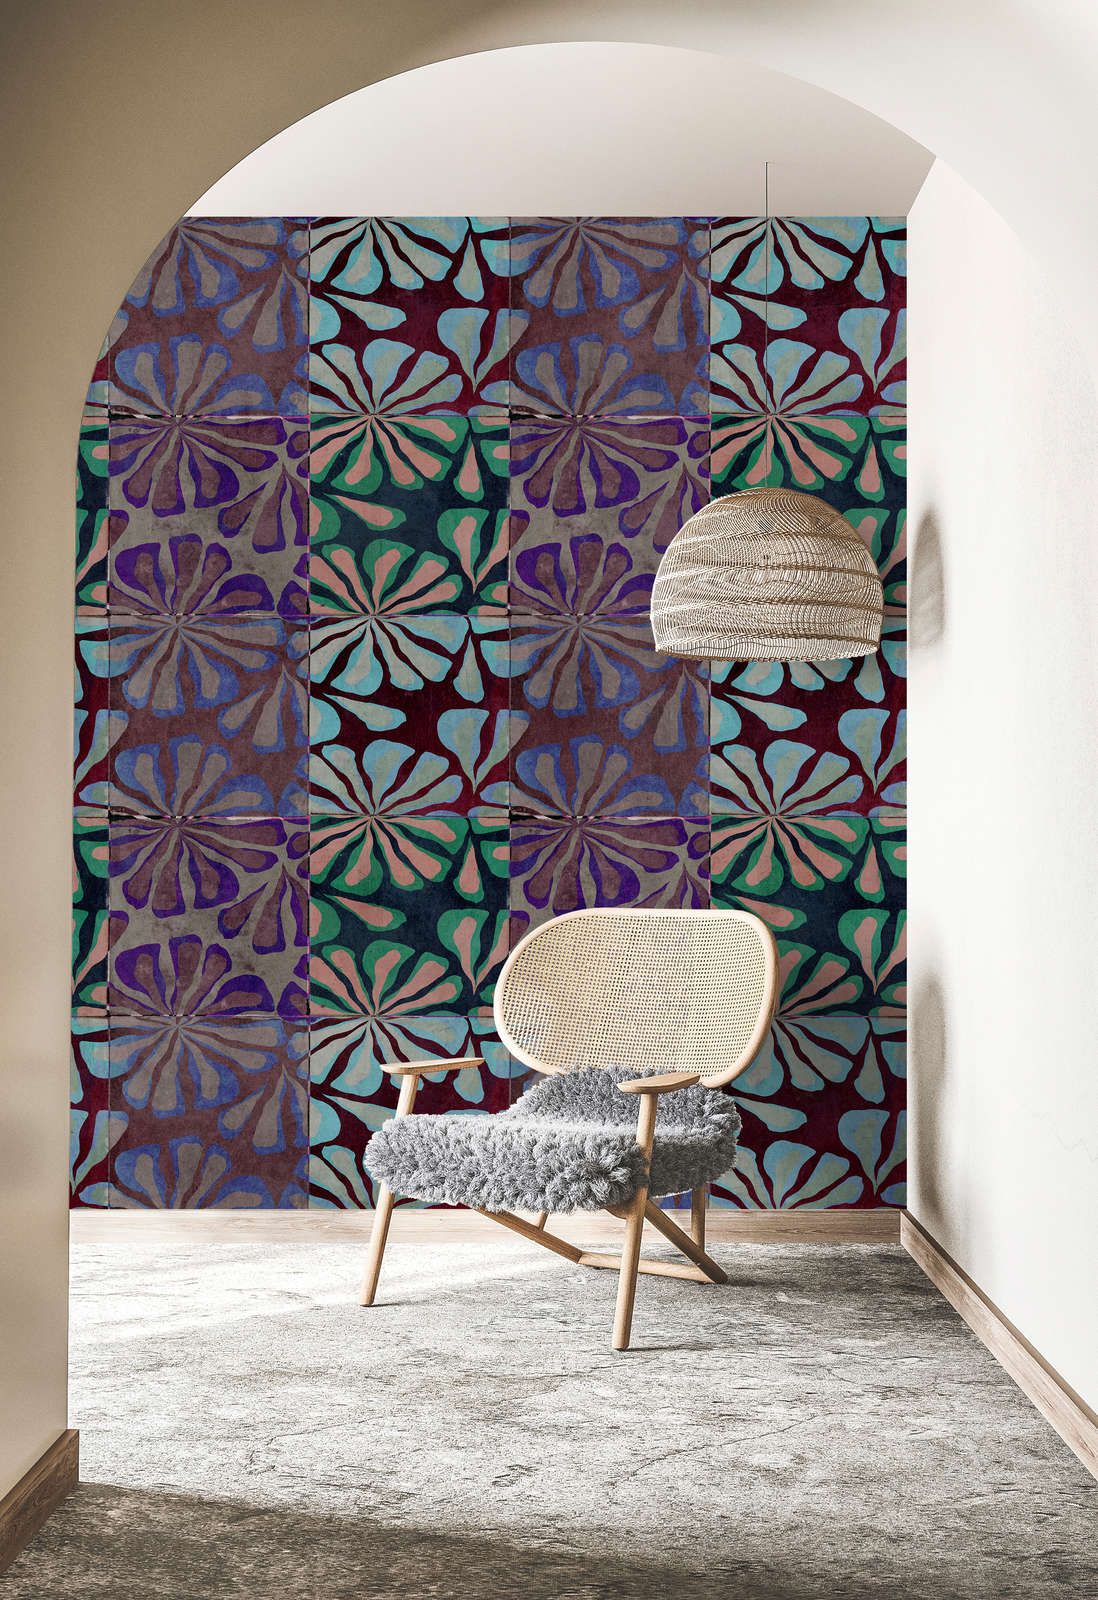             Photo wallpaper »nevio« - Colourful patchwork design against a concrete plaster look - Smooth, slightly shiny premium non-woven fabric
        